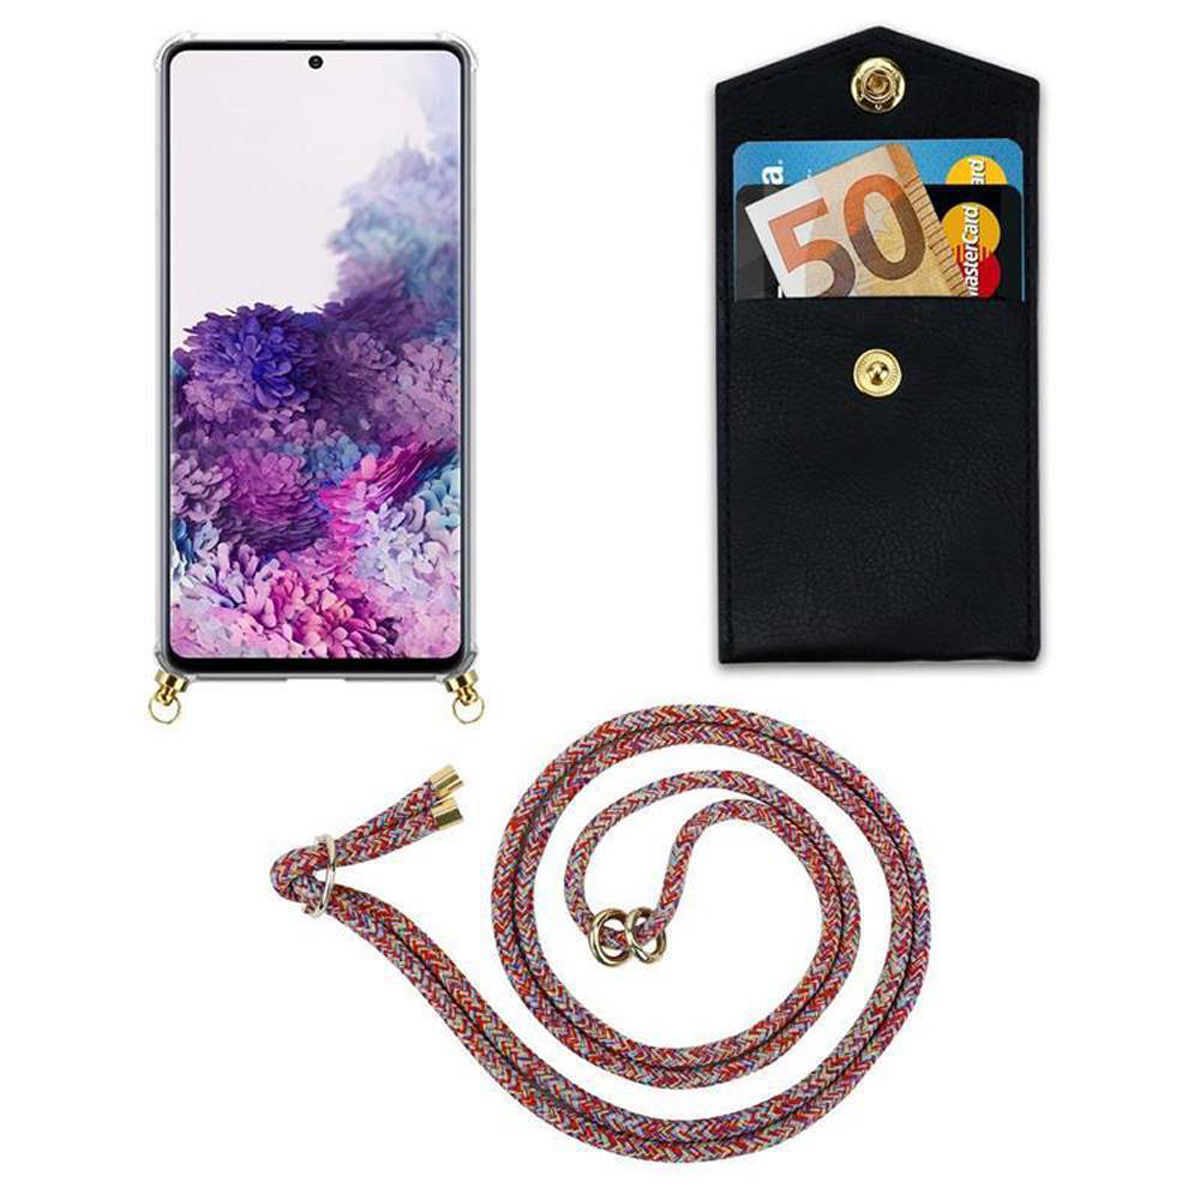 mit Kordel Kette abnehmbarer M40s, Band PARROT Samsung, A51 Gold CADORABO COLORFUL 4G / Hülle, Backcover, Ringen, und Handy Galaxy